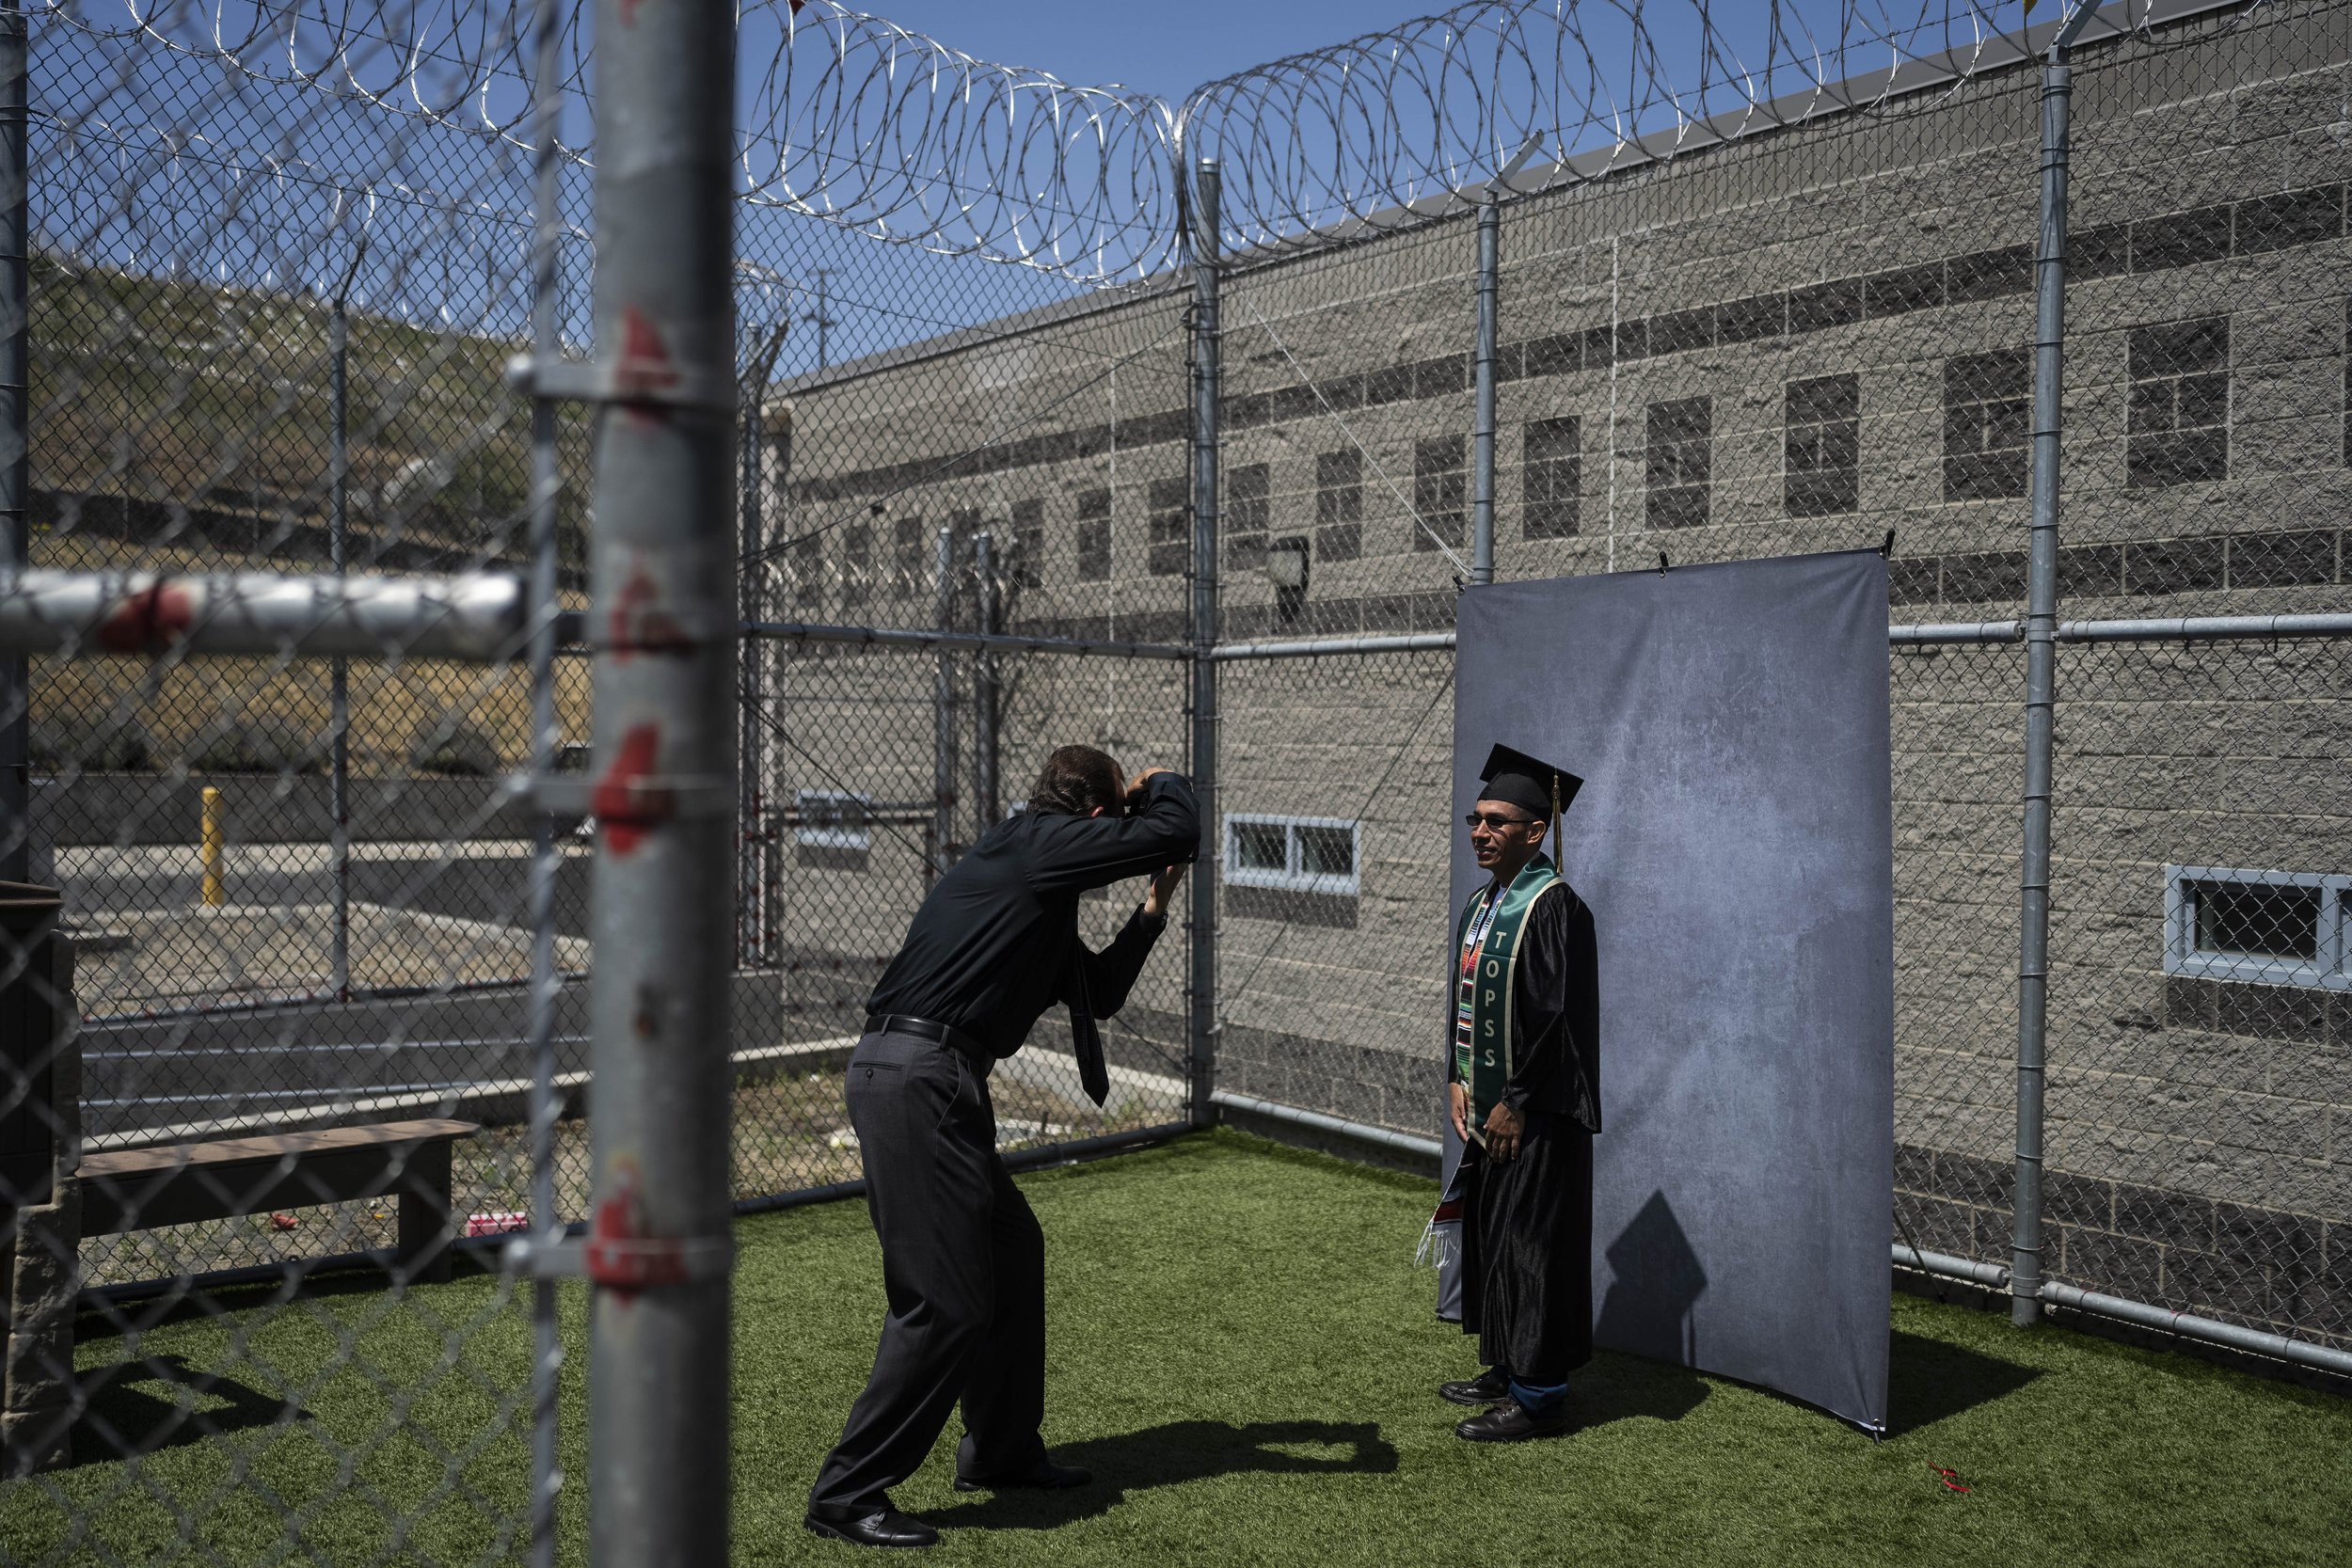  Incarcerated graduate Jose Catalan poses for photos after his graduation ceremony at Folsom State Prison in Folsom, Calif., on May 25, 2023. Catalan earned his bachelor's degree in communications through the Transforming Outcomes Project at Sacramen